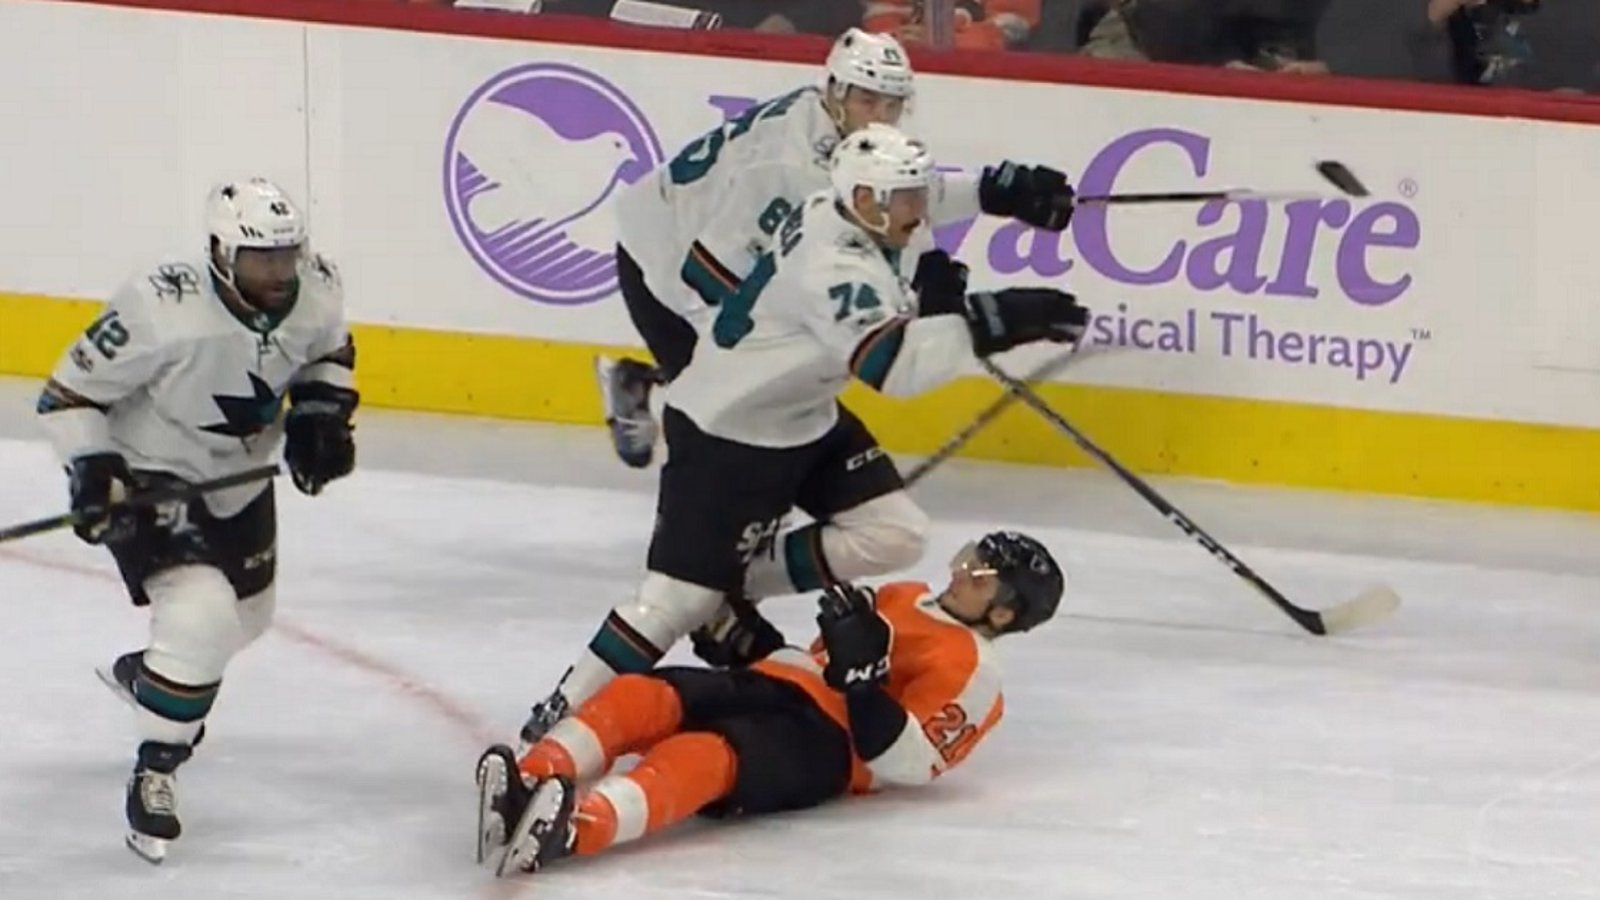 Laughton injured after taking a questionable hit and a knee to the head.